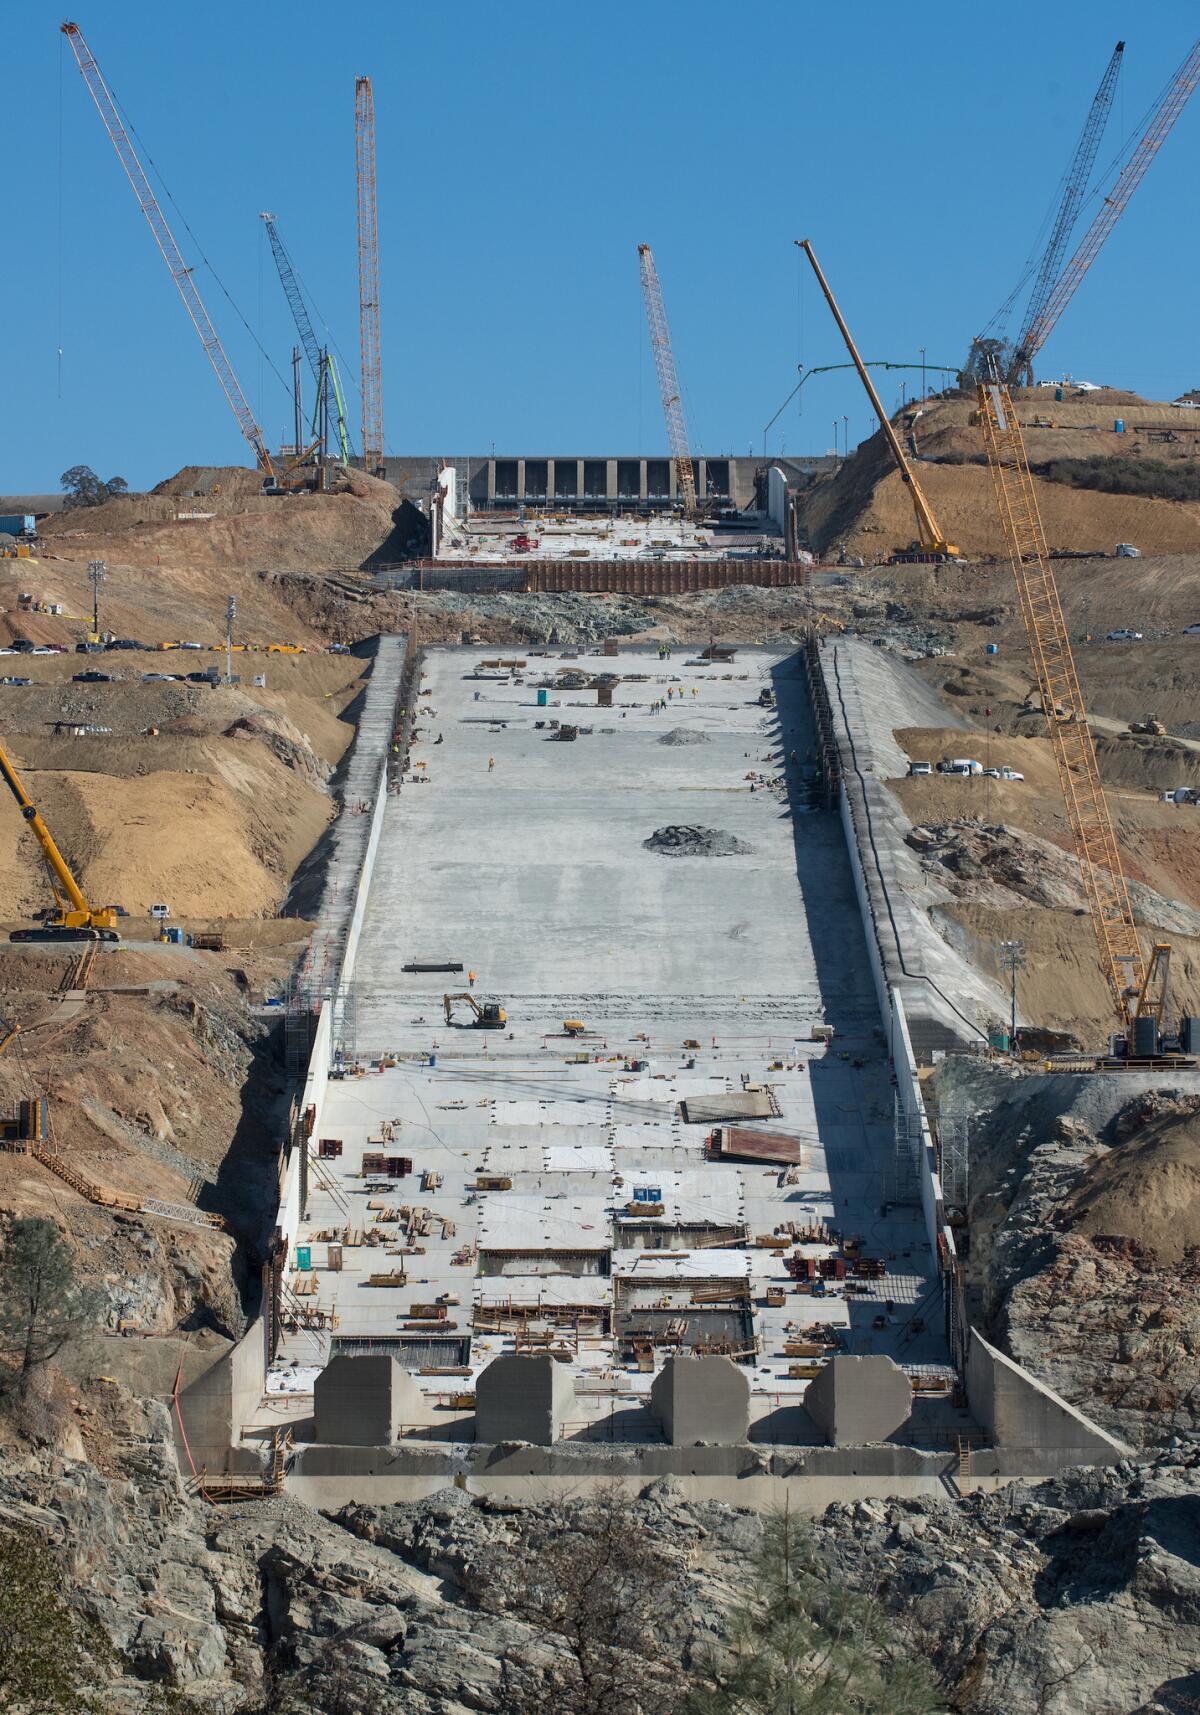 Crews continue placing rebar panels for the new sidewalls and structural concrete on the Lake Oroville flood control spillway on Oct. 13.